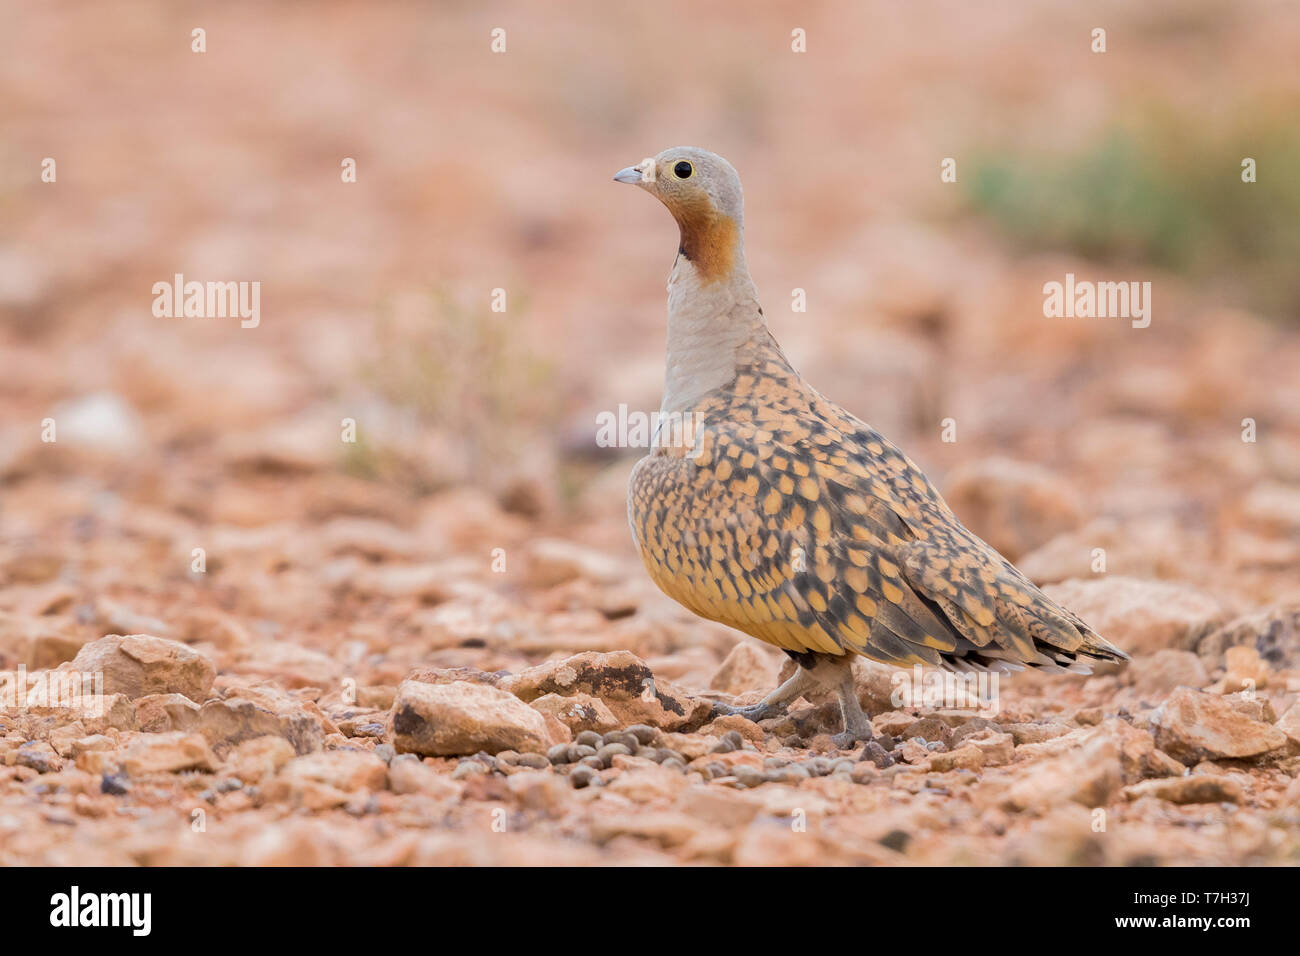 Black-bellied Sandgrouse (Pterocles orientalis), adult male standing on the ground Stock Photo